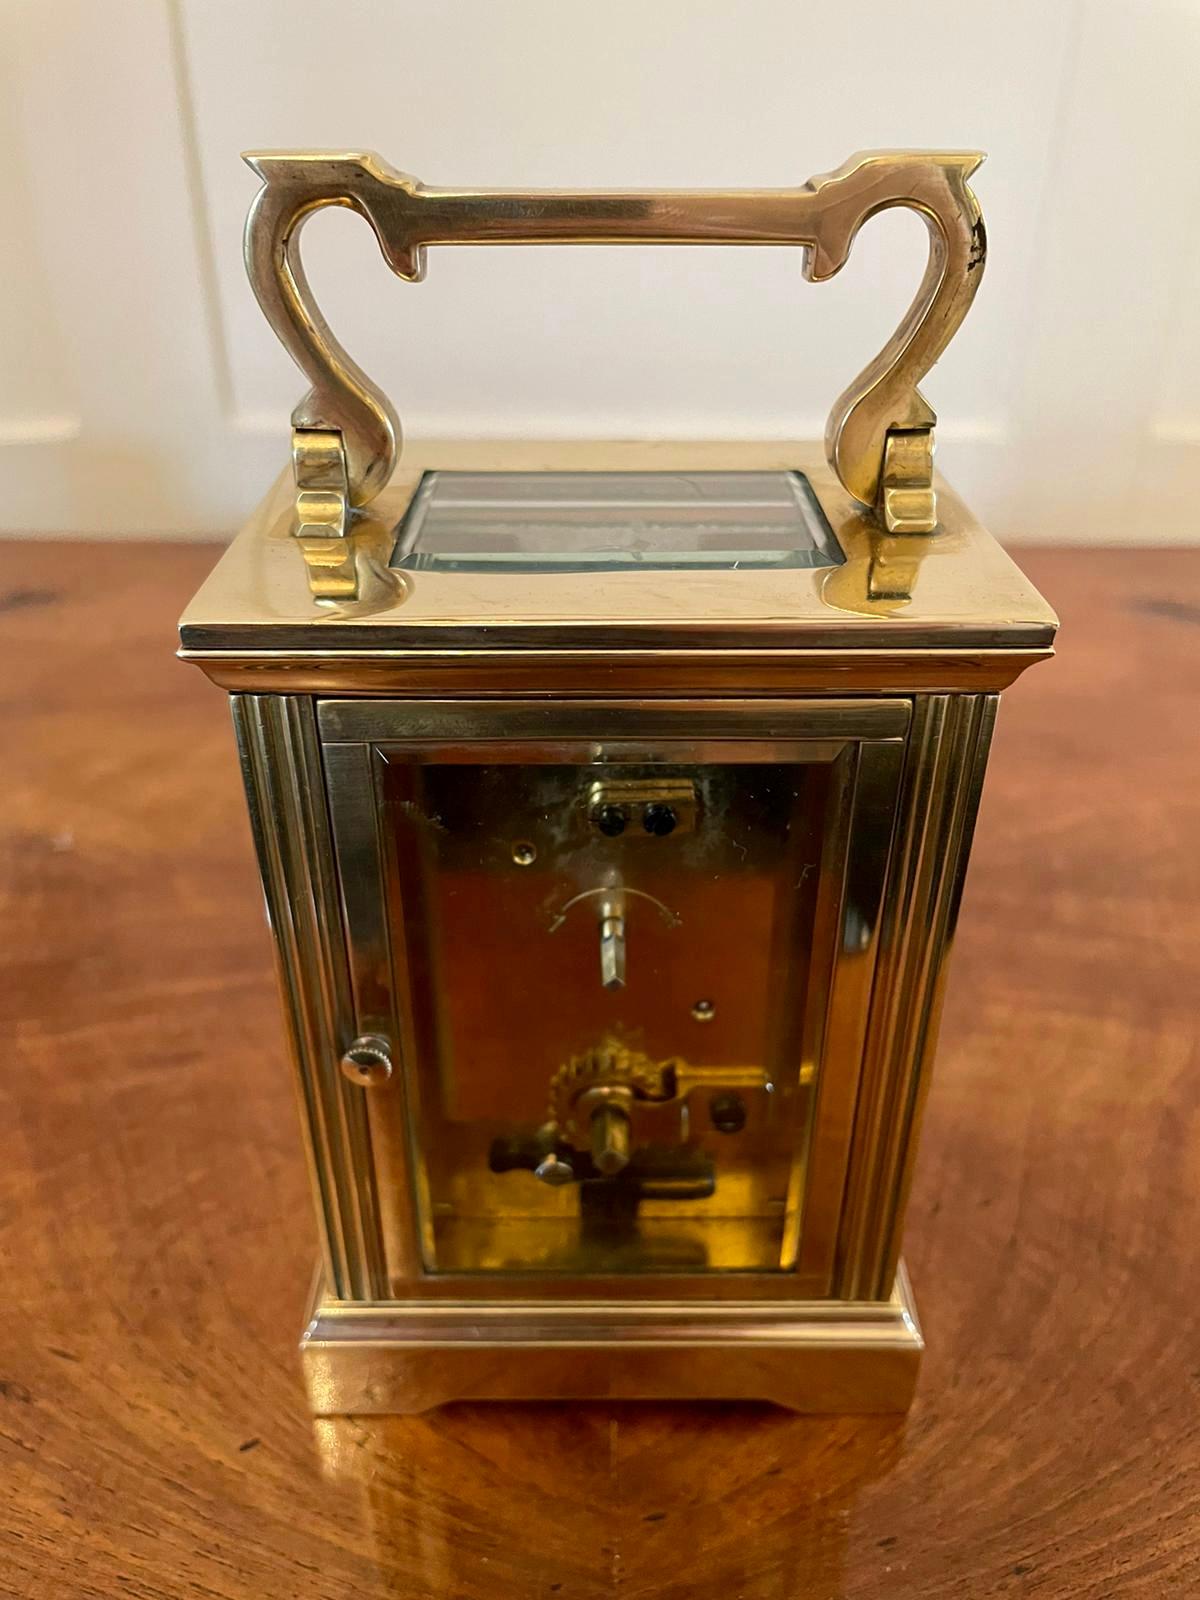 Antique brass carriage clock having a quality brass case, eight day french movement, enamelled dial with elegant original hands and bevel edged glass. It is in good working order and comes with the original key.

 An elegant example in lovely